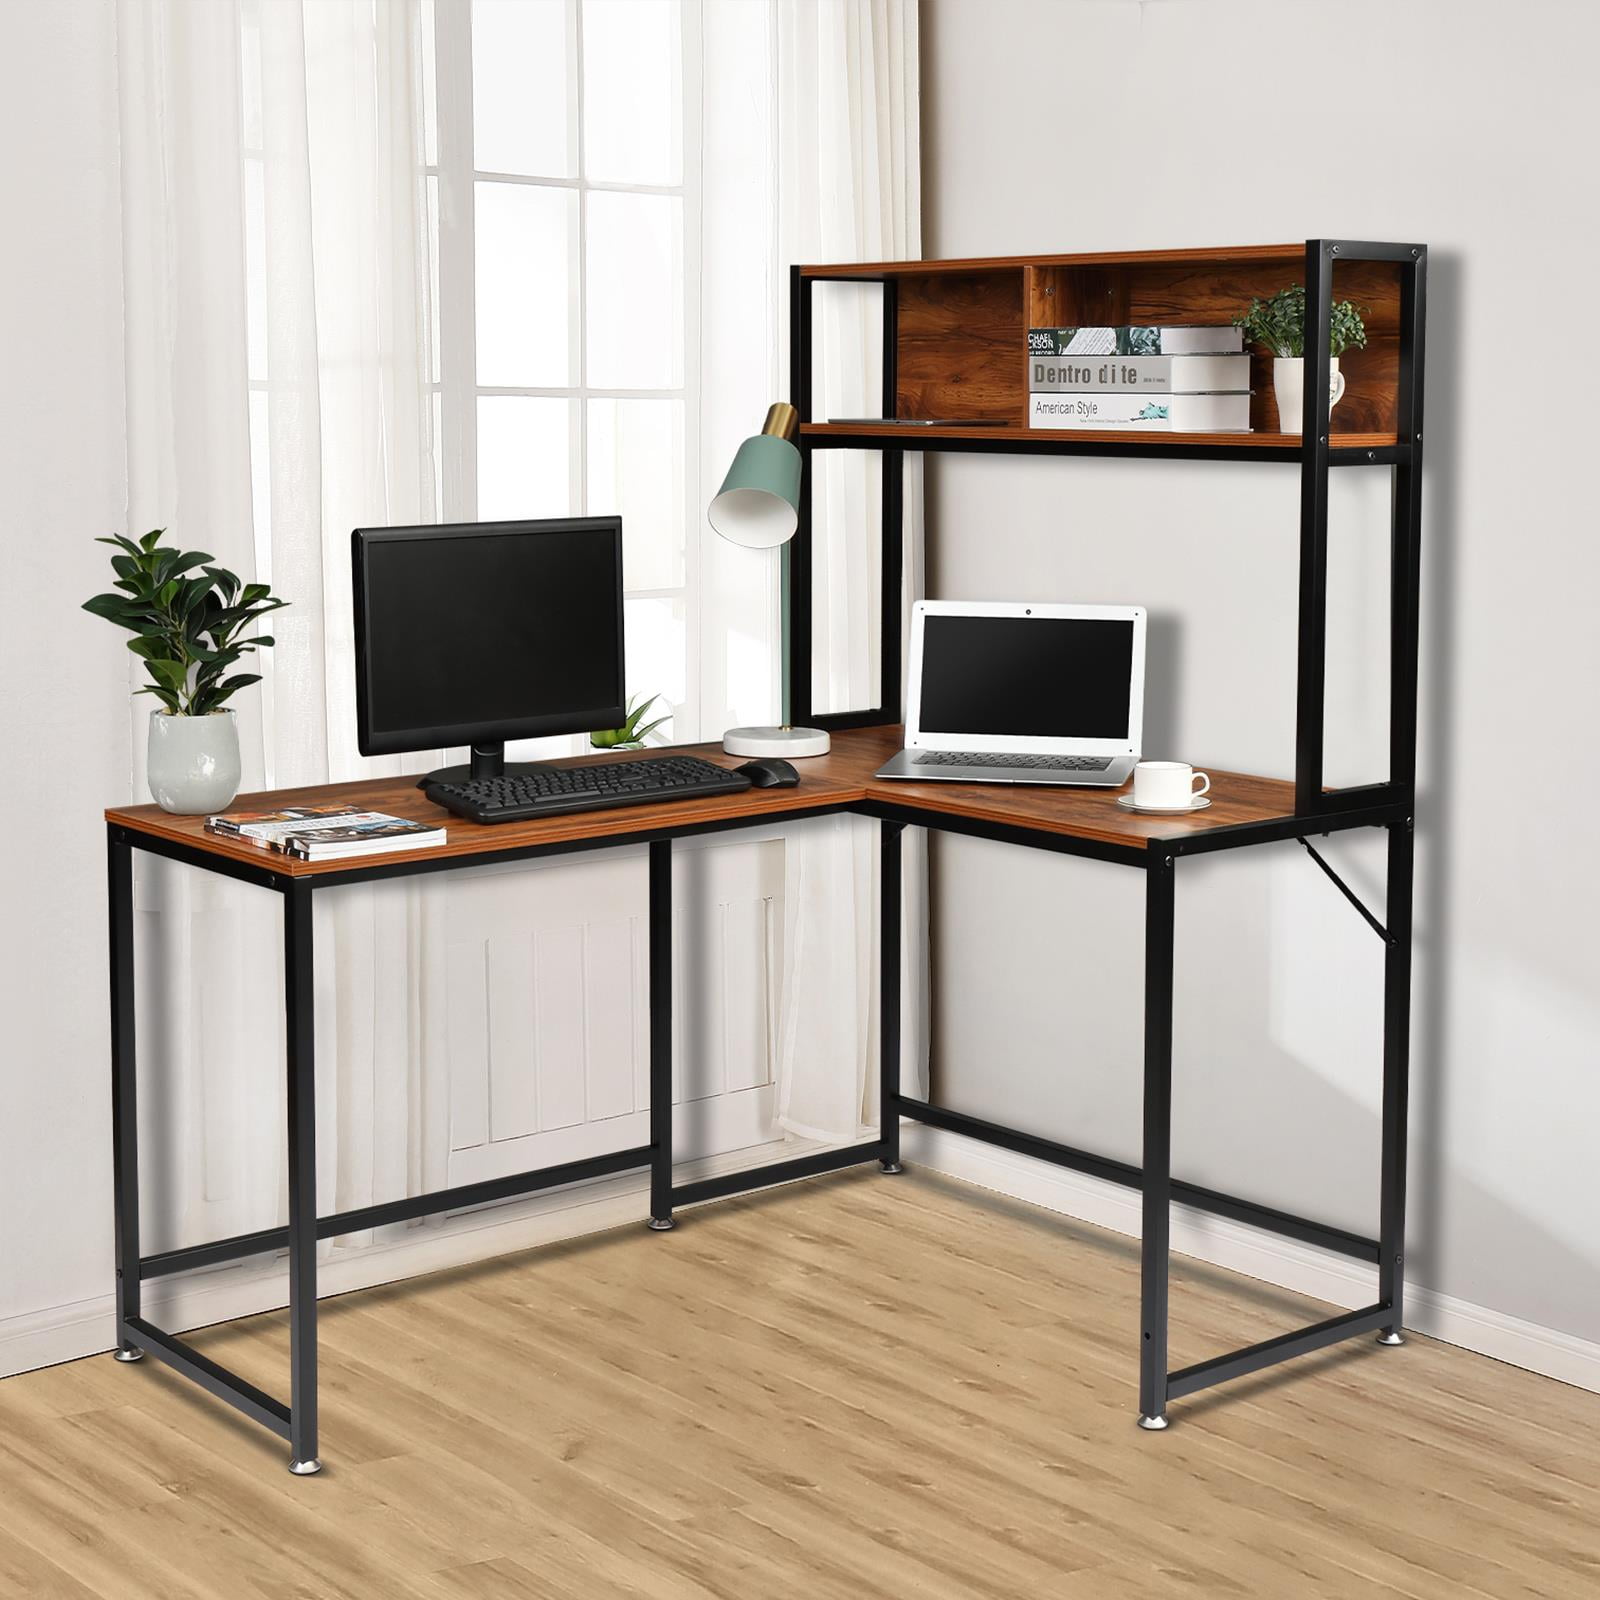 Laptop Desk 120x60x75cm Study and Office Integration Workstation with Two-tier Storage Shelves for Learning and Working Home office Table Oak & Tea Desk Practical Computer Desk